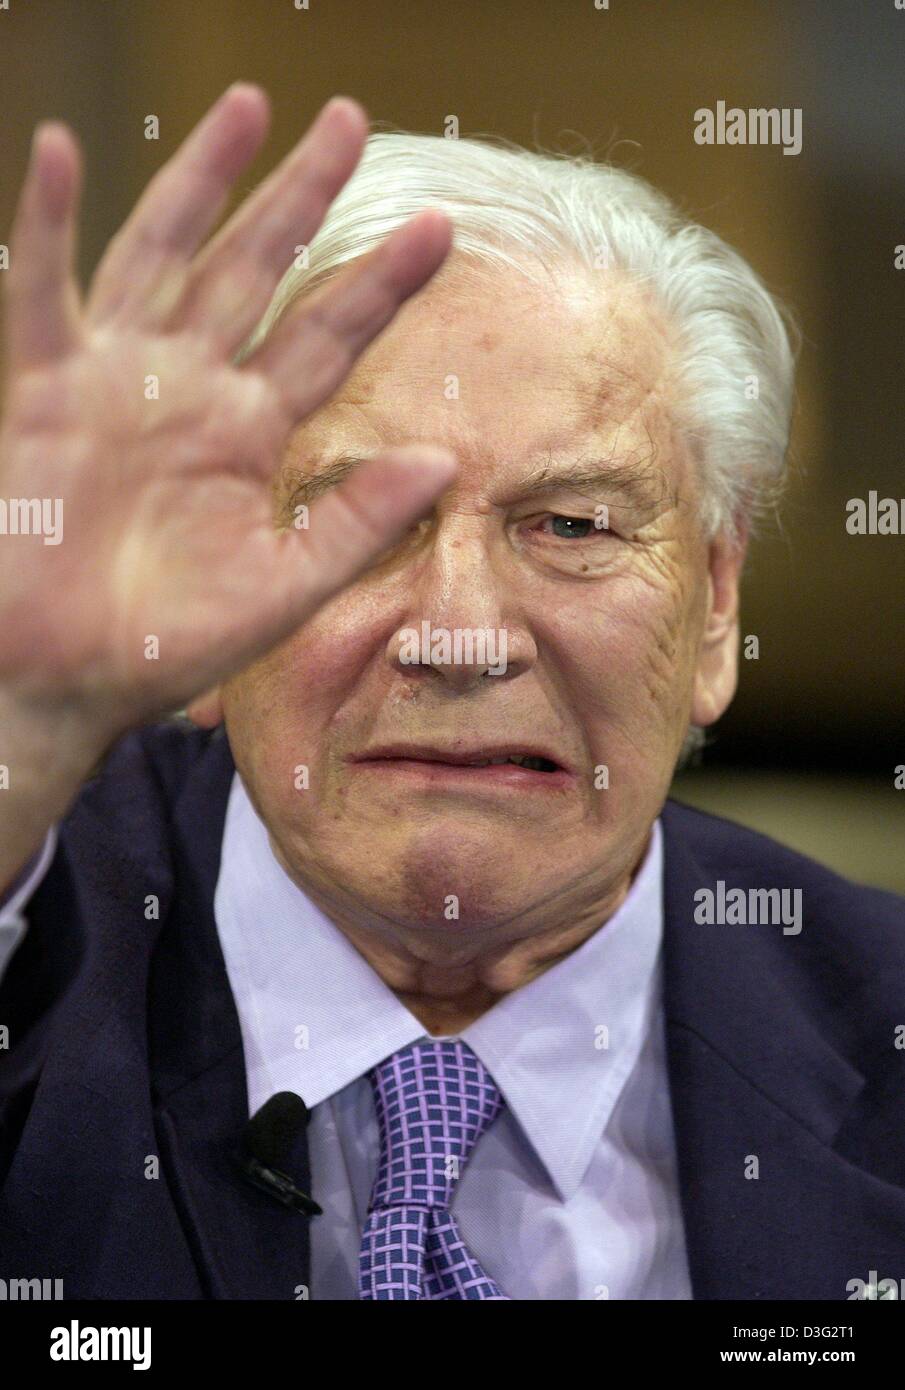 (dpa) - Sir Peter Ustinov, British actor and ambassador of the United Nations Children's Fund UNICEF, gestures during a TV show in Berlin, 5 March 2003. Ustinov, who speaks fluent German, is known to proudly say that he has Russian, German, Spanish, Italian, French and Ethiopian blood in his veins. Stock Photo